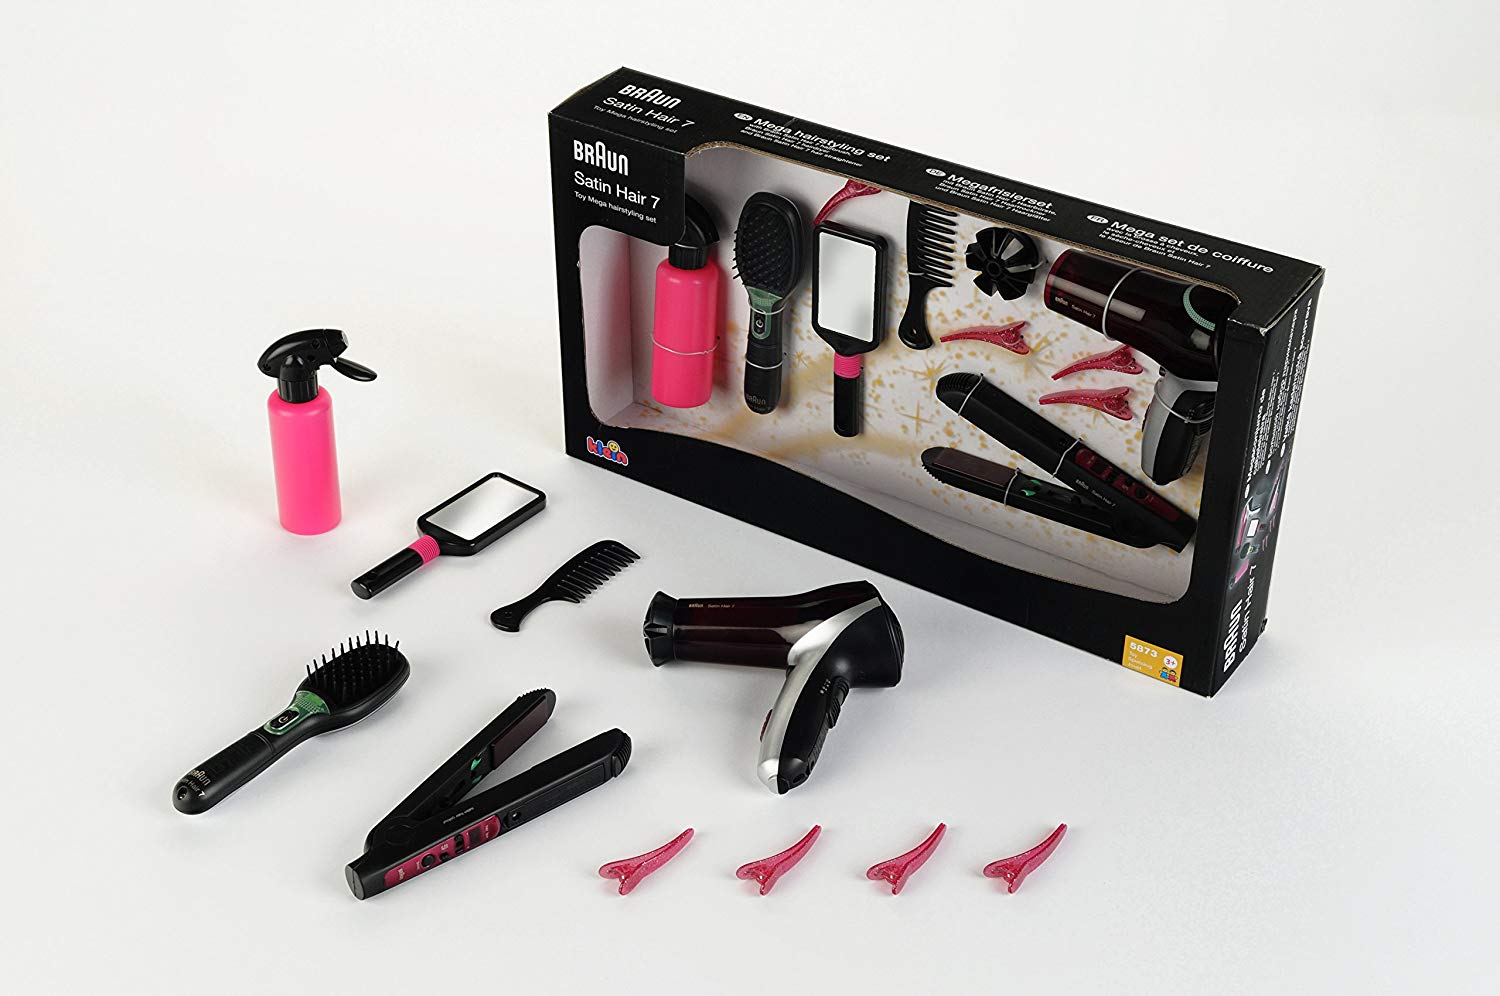 campagne analyse Lada Theo Klein 5873 Braun Satin Hair 7 Mega Set I With hair straightener, brush  and much more I Battery-powered hairdryer I Packaging dimensions: 49.5 cm x  8 cm x 26 cm I